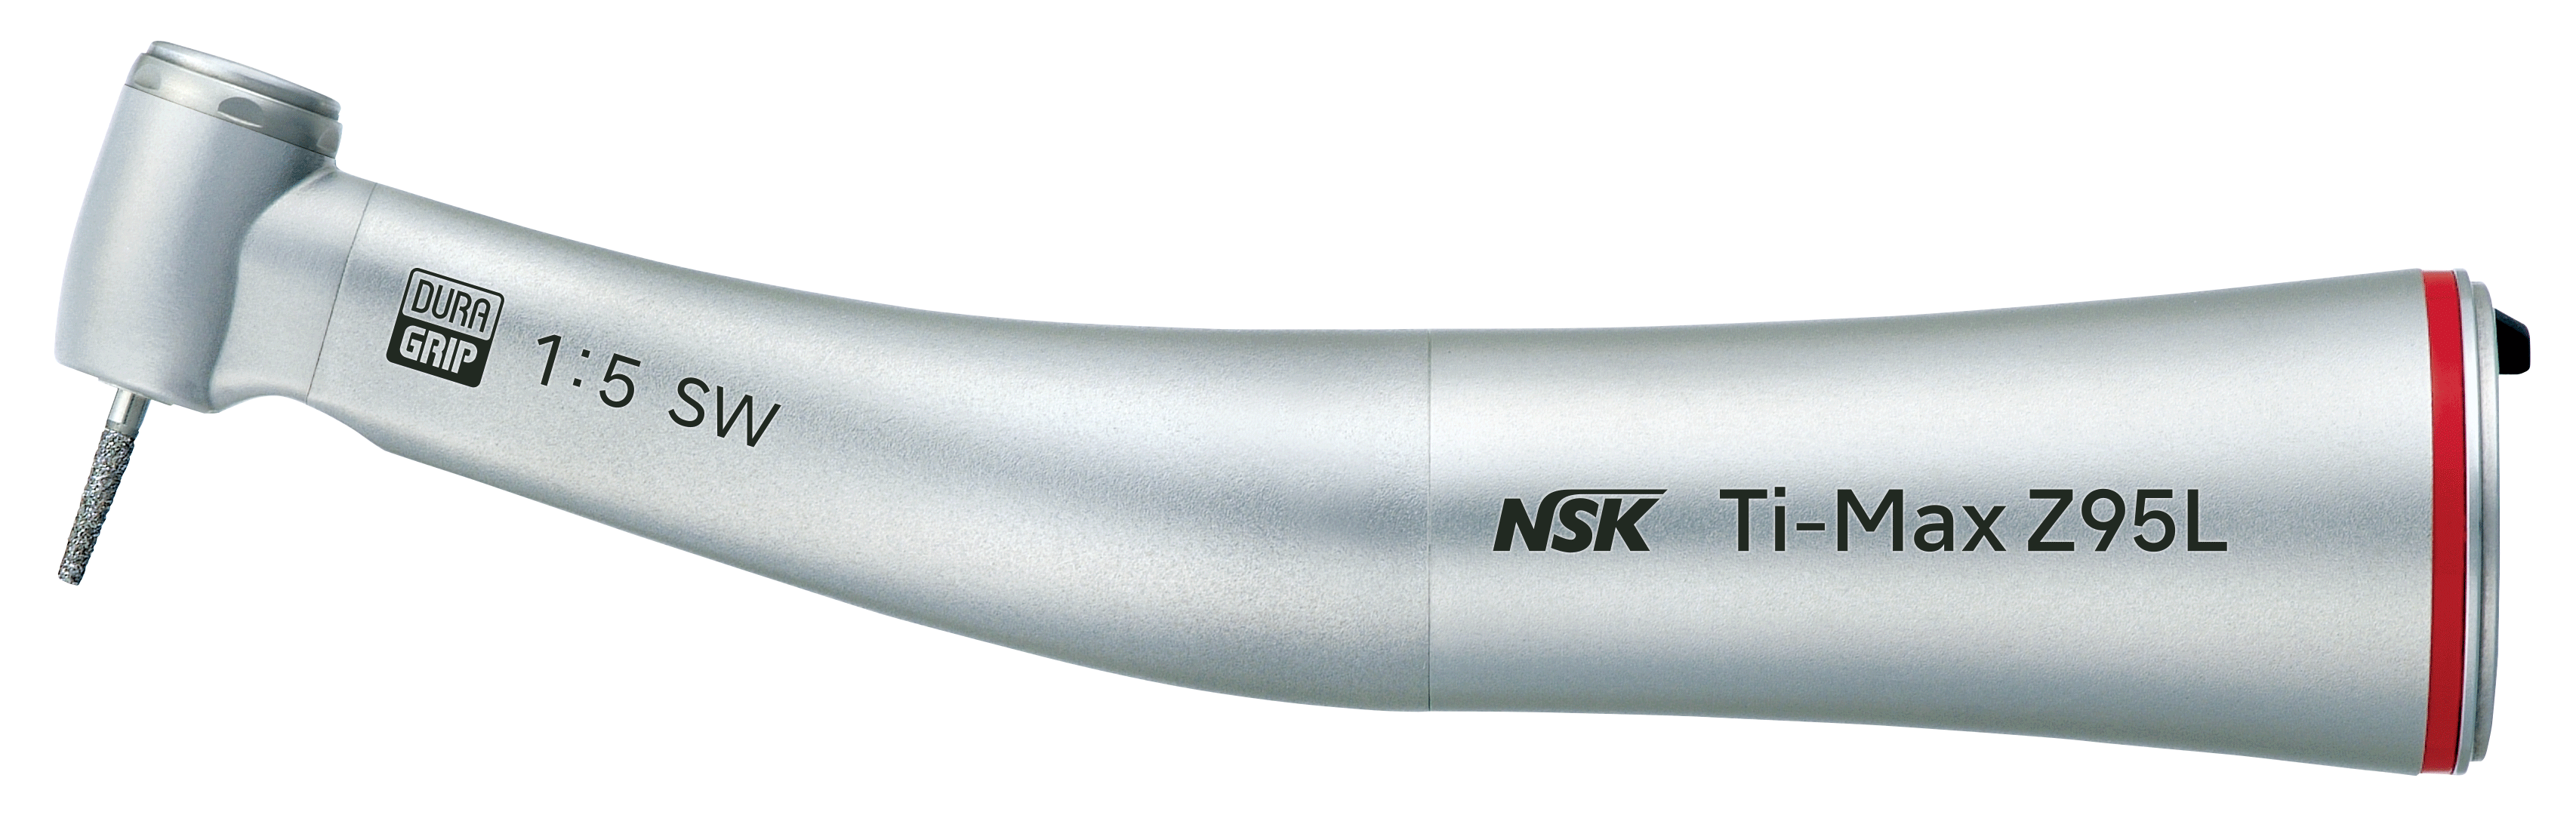 NSK Ti-Max Z95L handpiece with Switch Valve